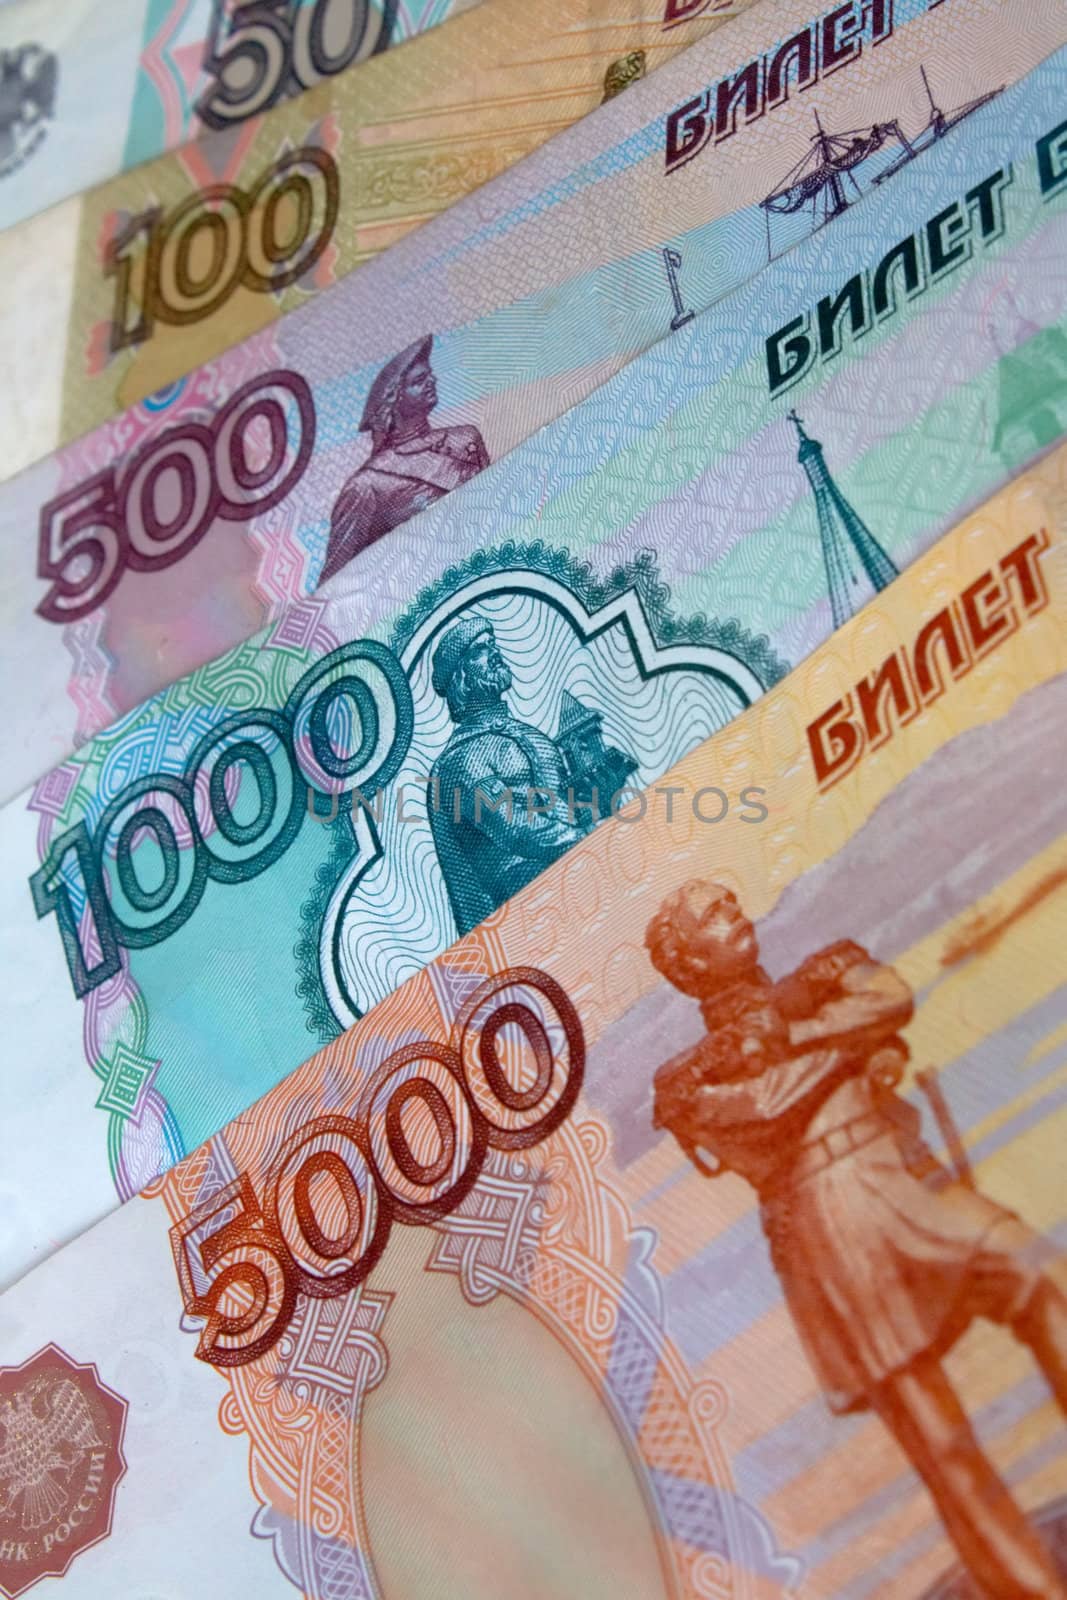 Russian money of different denomination, photographed close-up.